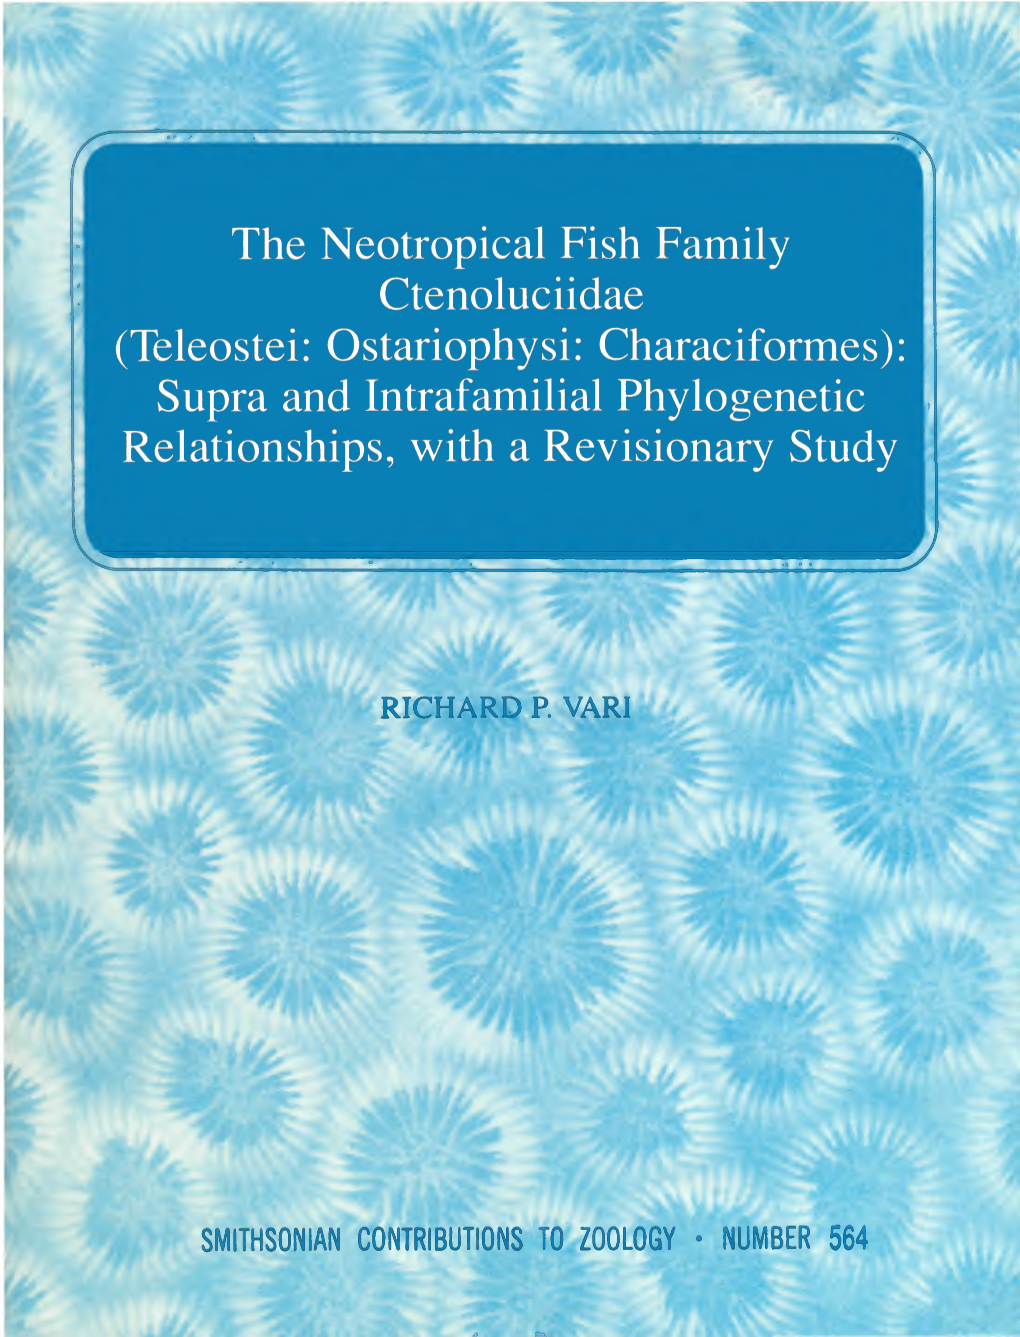 The Neotropical Fish Family Ctenoluciidae (Teleostei: Ostariophysi: Characiformes): Supra and Intrafamilial Phylogenetic Relationships, with a Revisionary Study